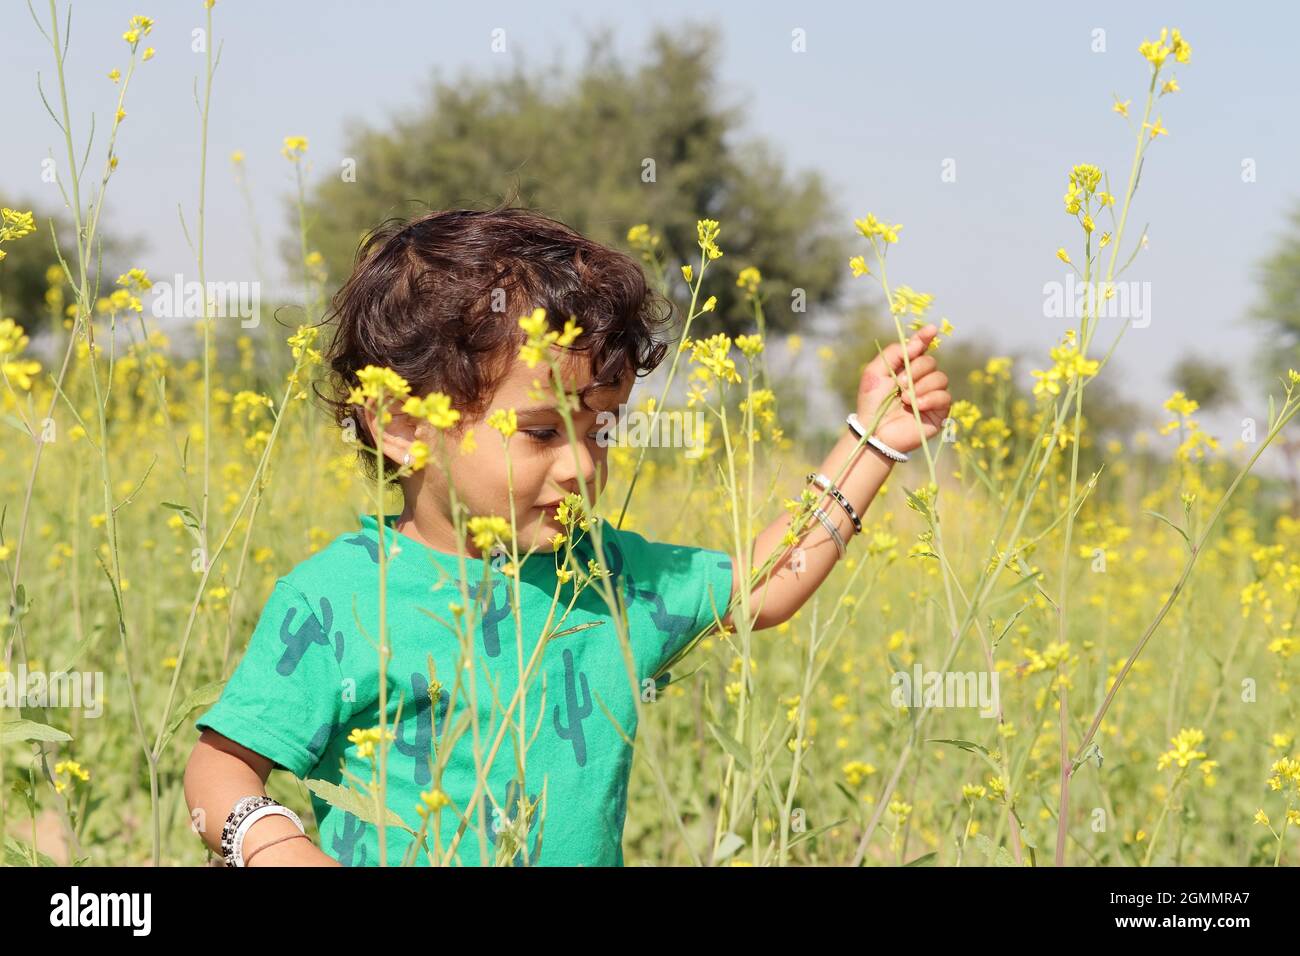 Close-up portrait of A beautiful cute Indian Hindu little child enjoying and playing in a mustard field wearing a green shirt Stock Photo